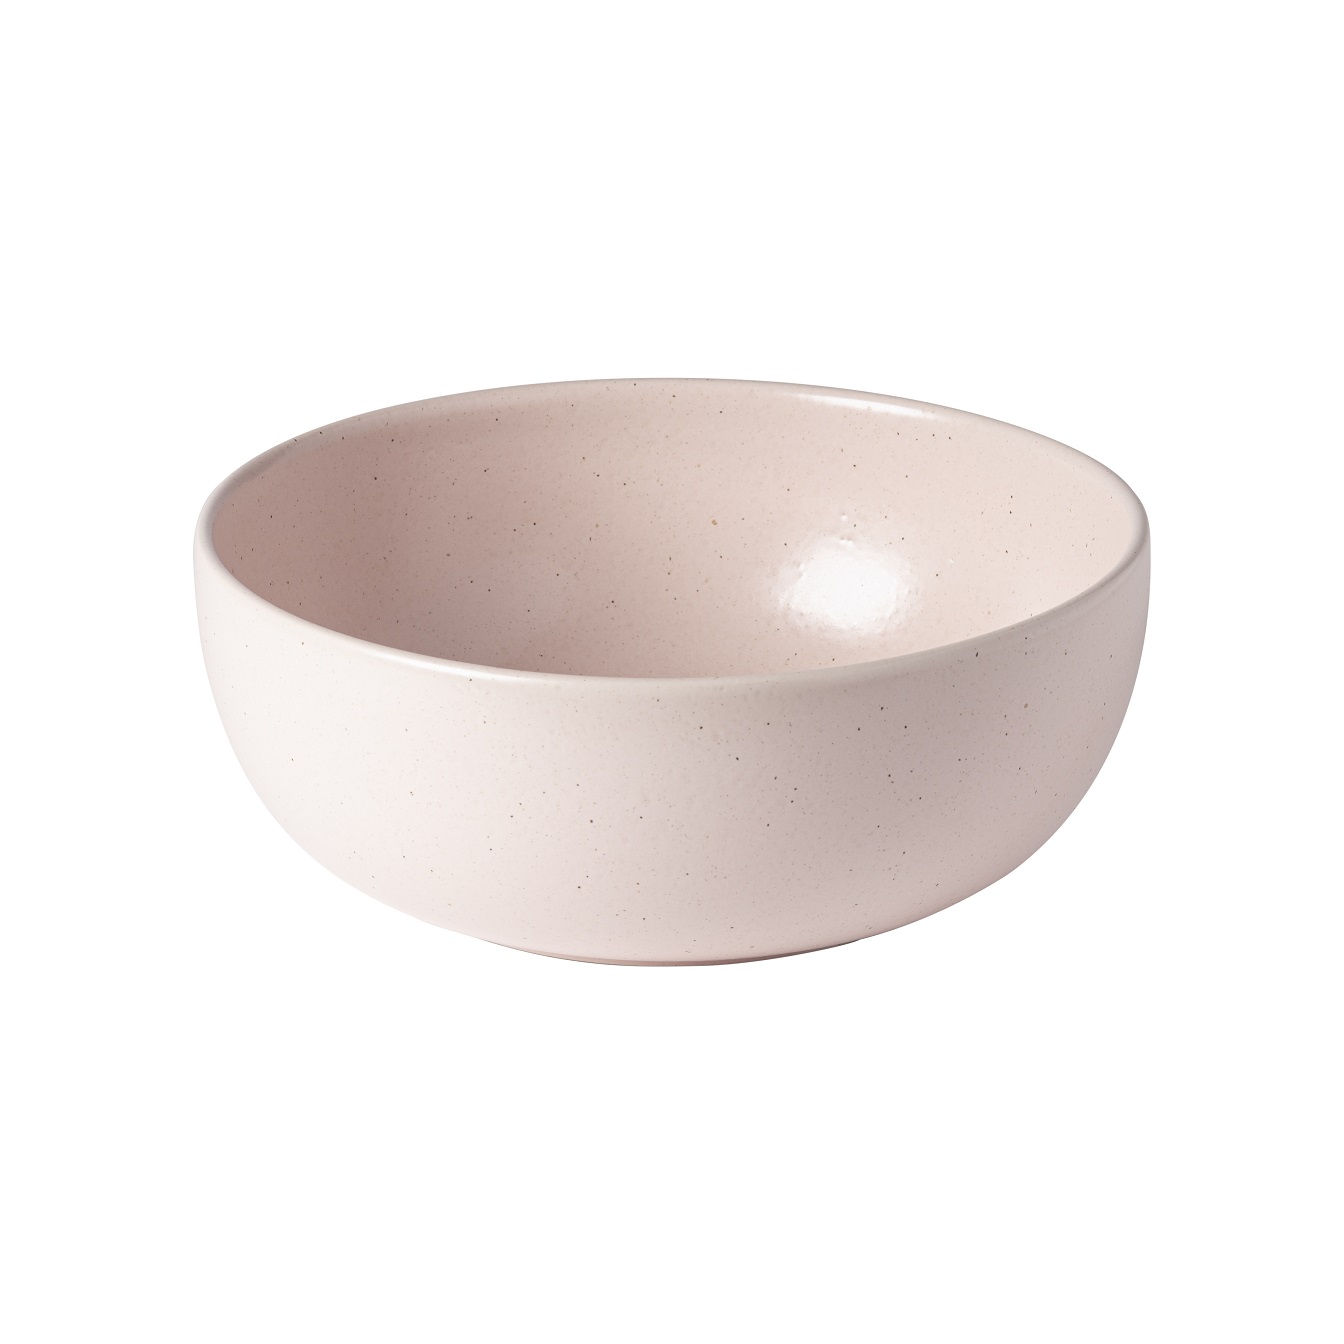 Pacifica Marshmallow Serving Bowl 25.1cm Gift